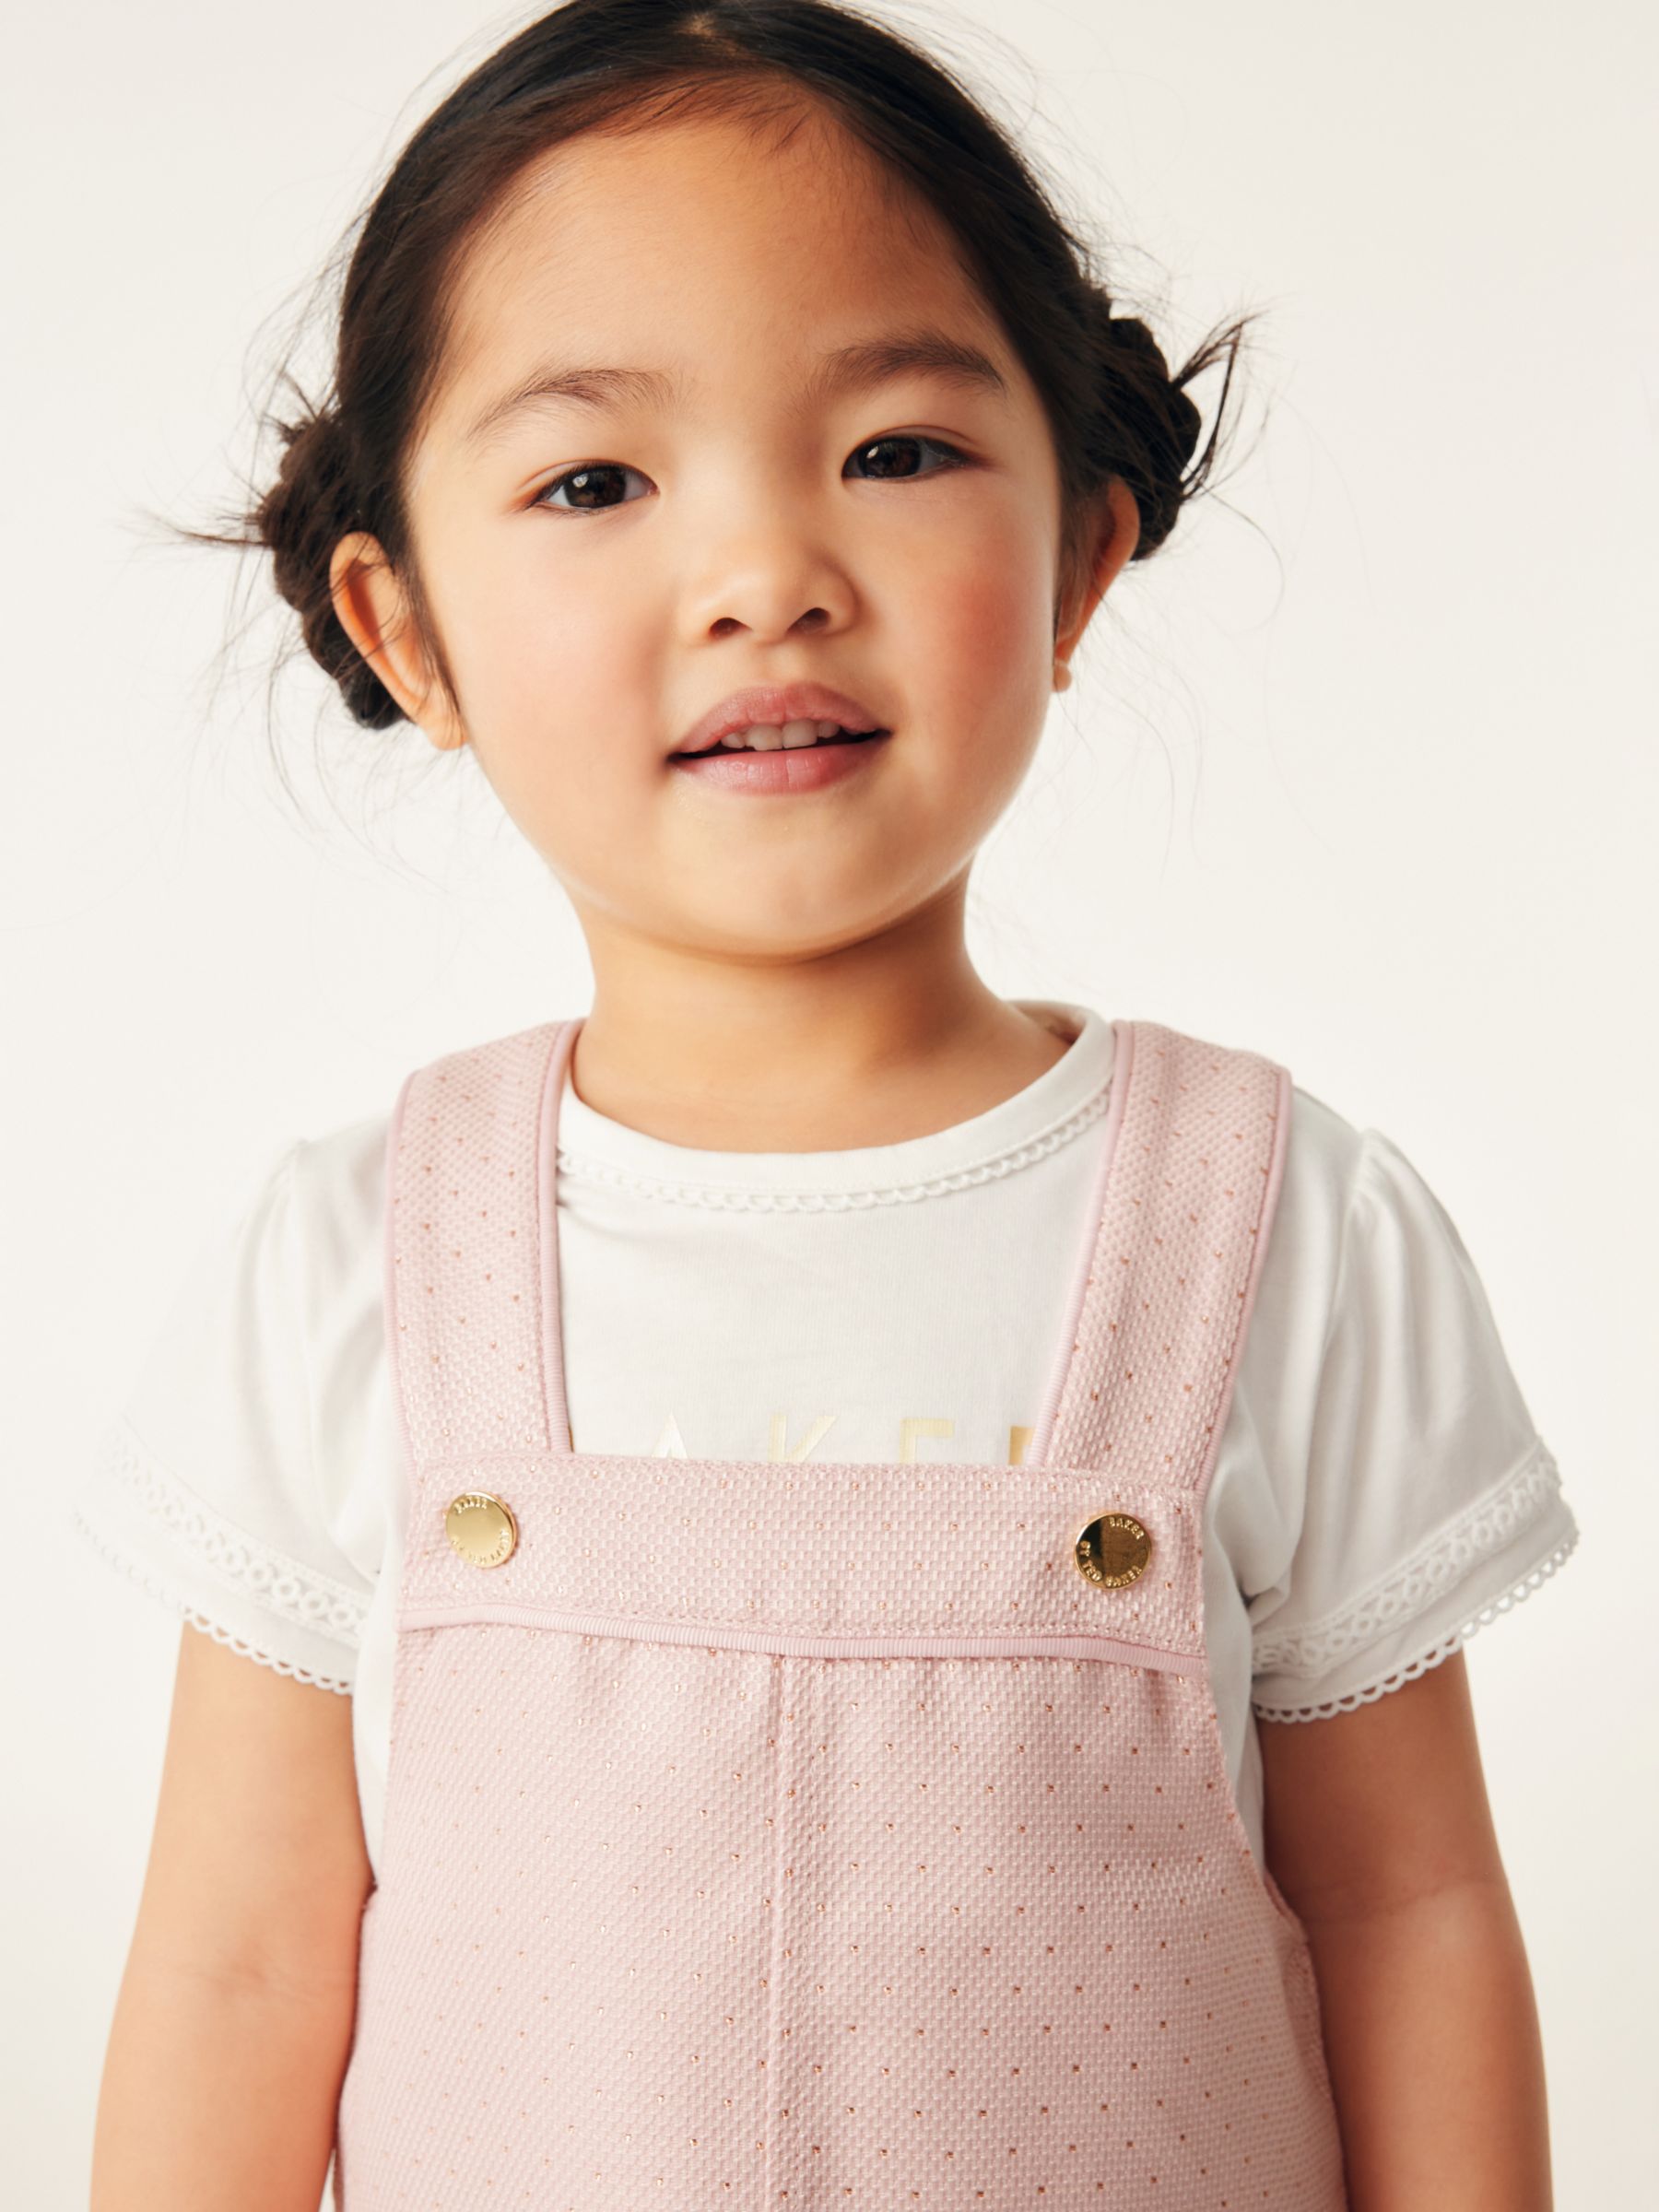 Buy Ted Baker Baby Sparkly Pinafore Dress & T-Shirt Set, Pink/White Online at johnlewis.com